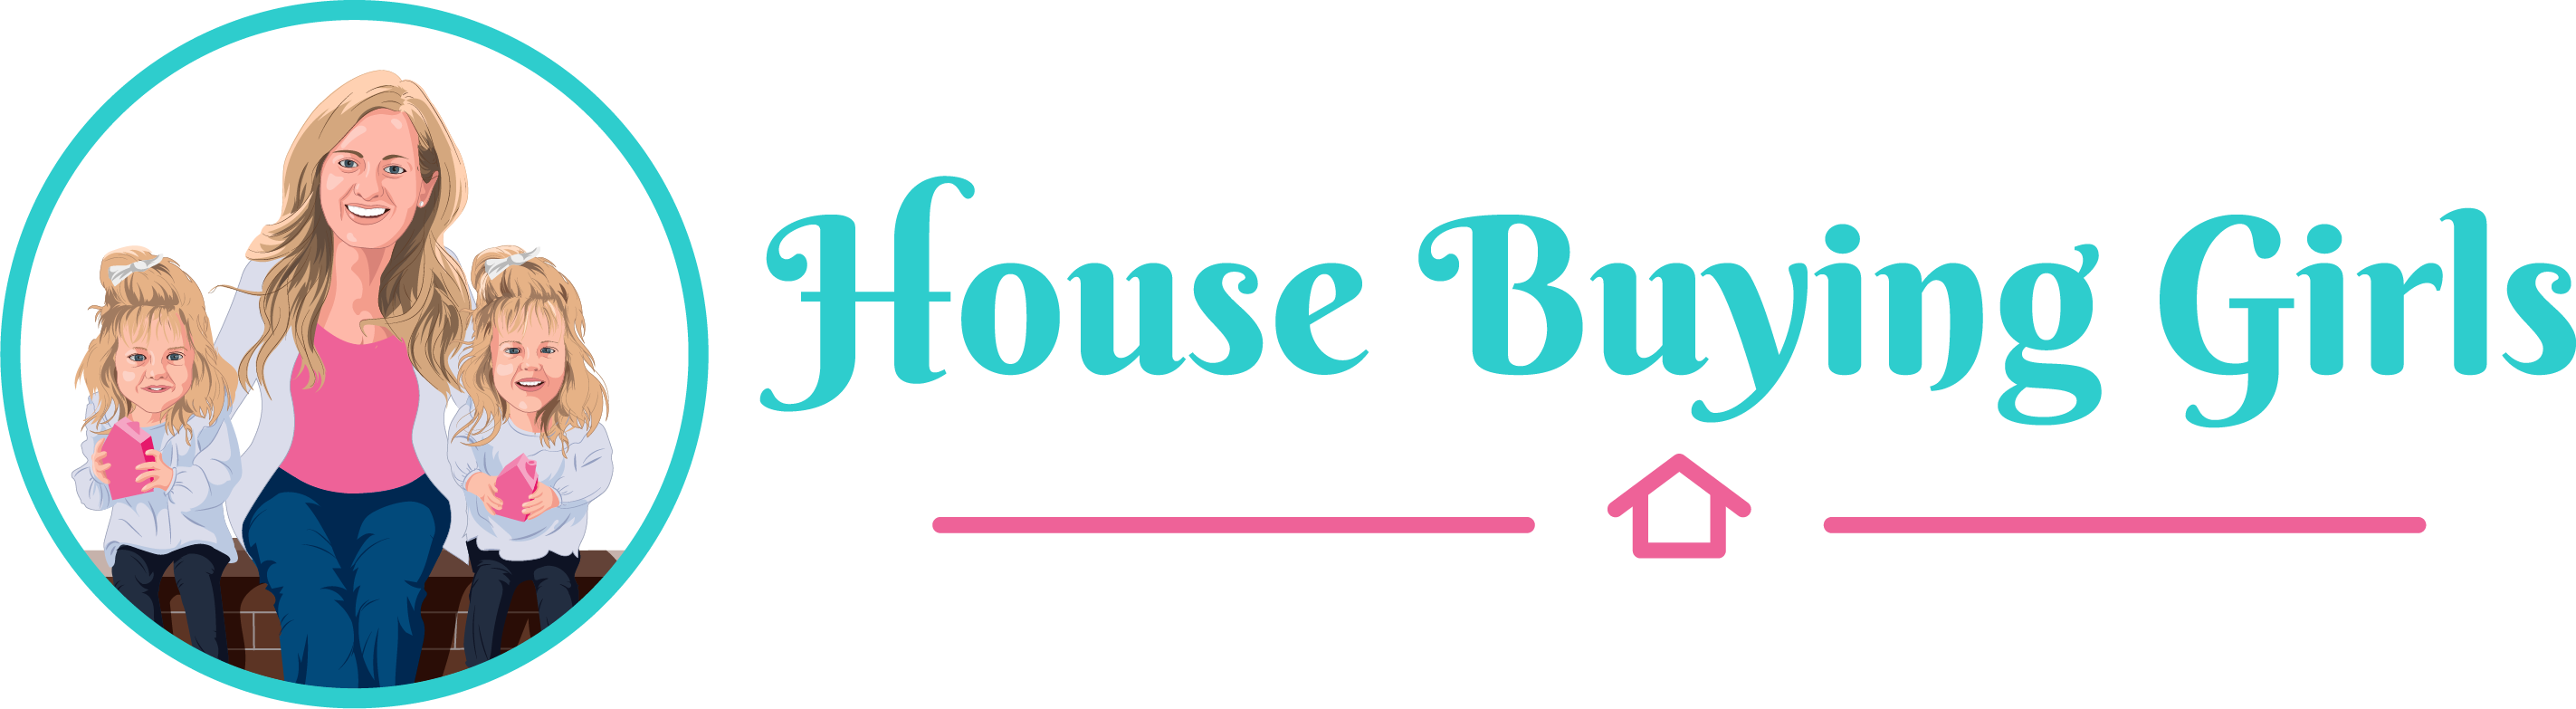 House Buying Girls Expands Into All Texas Markets Enabling Homeowners To Sell Their Homes Fast and Efficiently